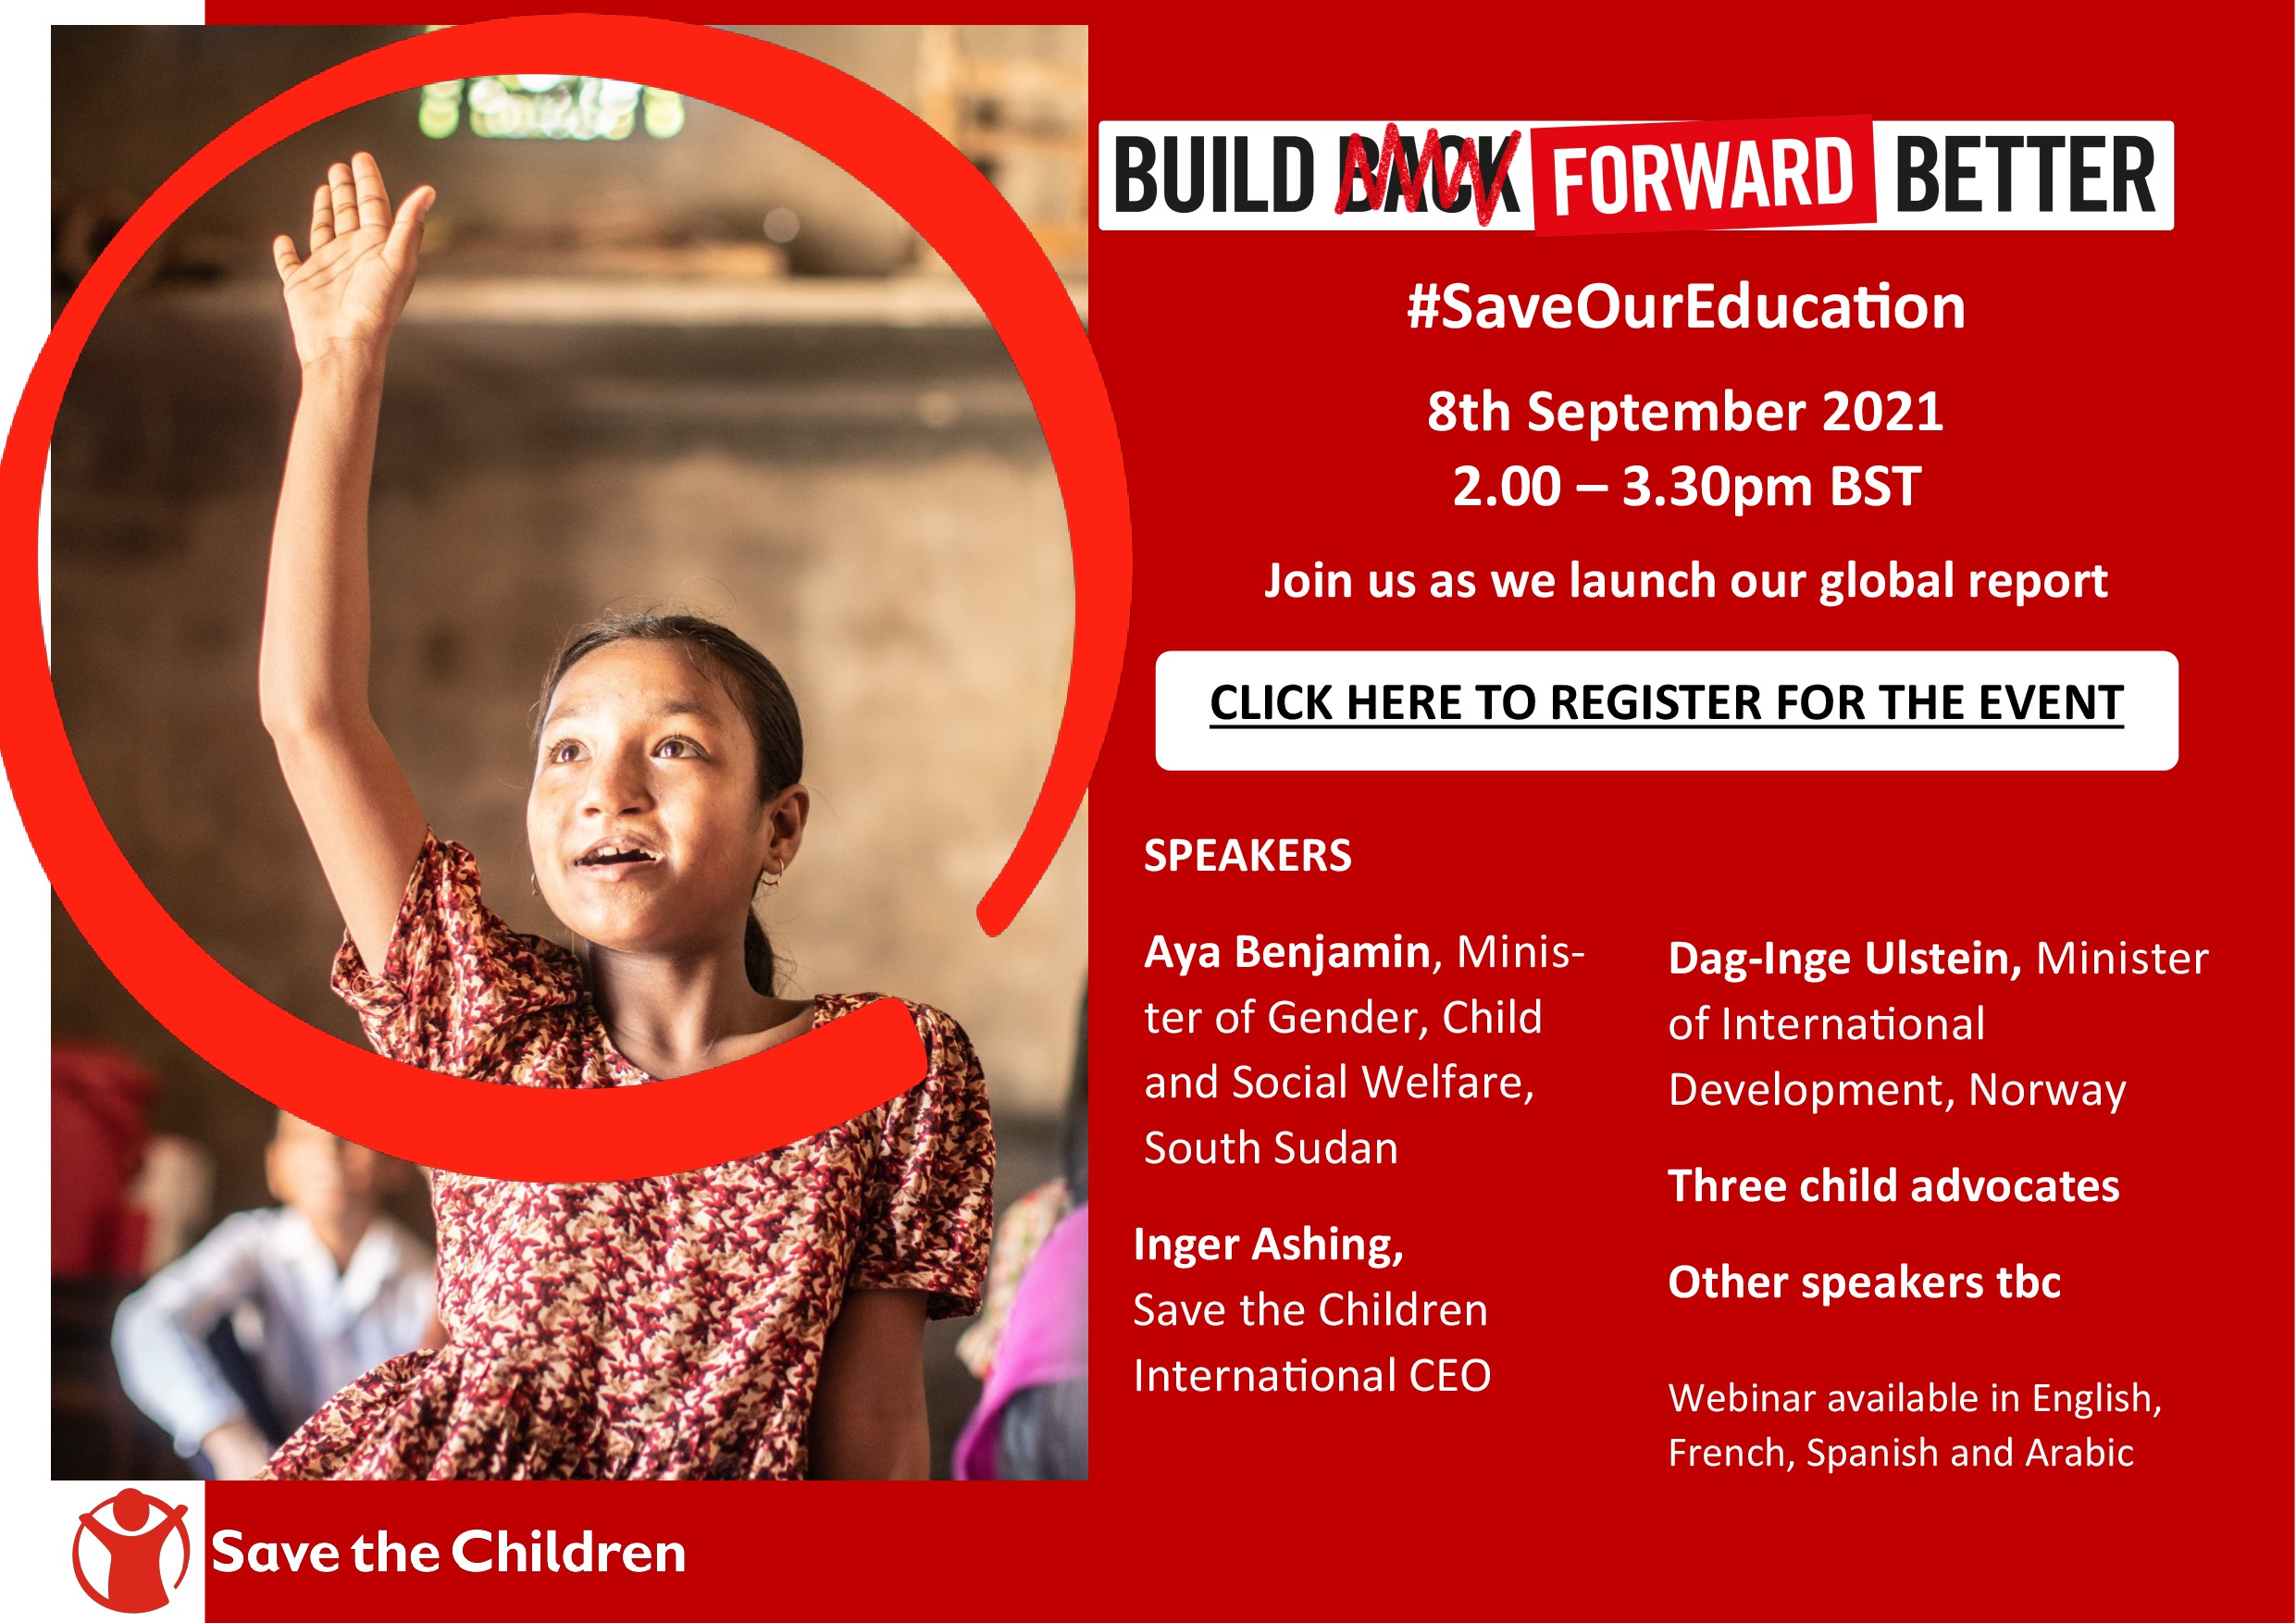 Build Forward Better to Save our Education